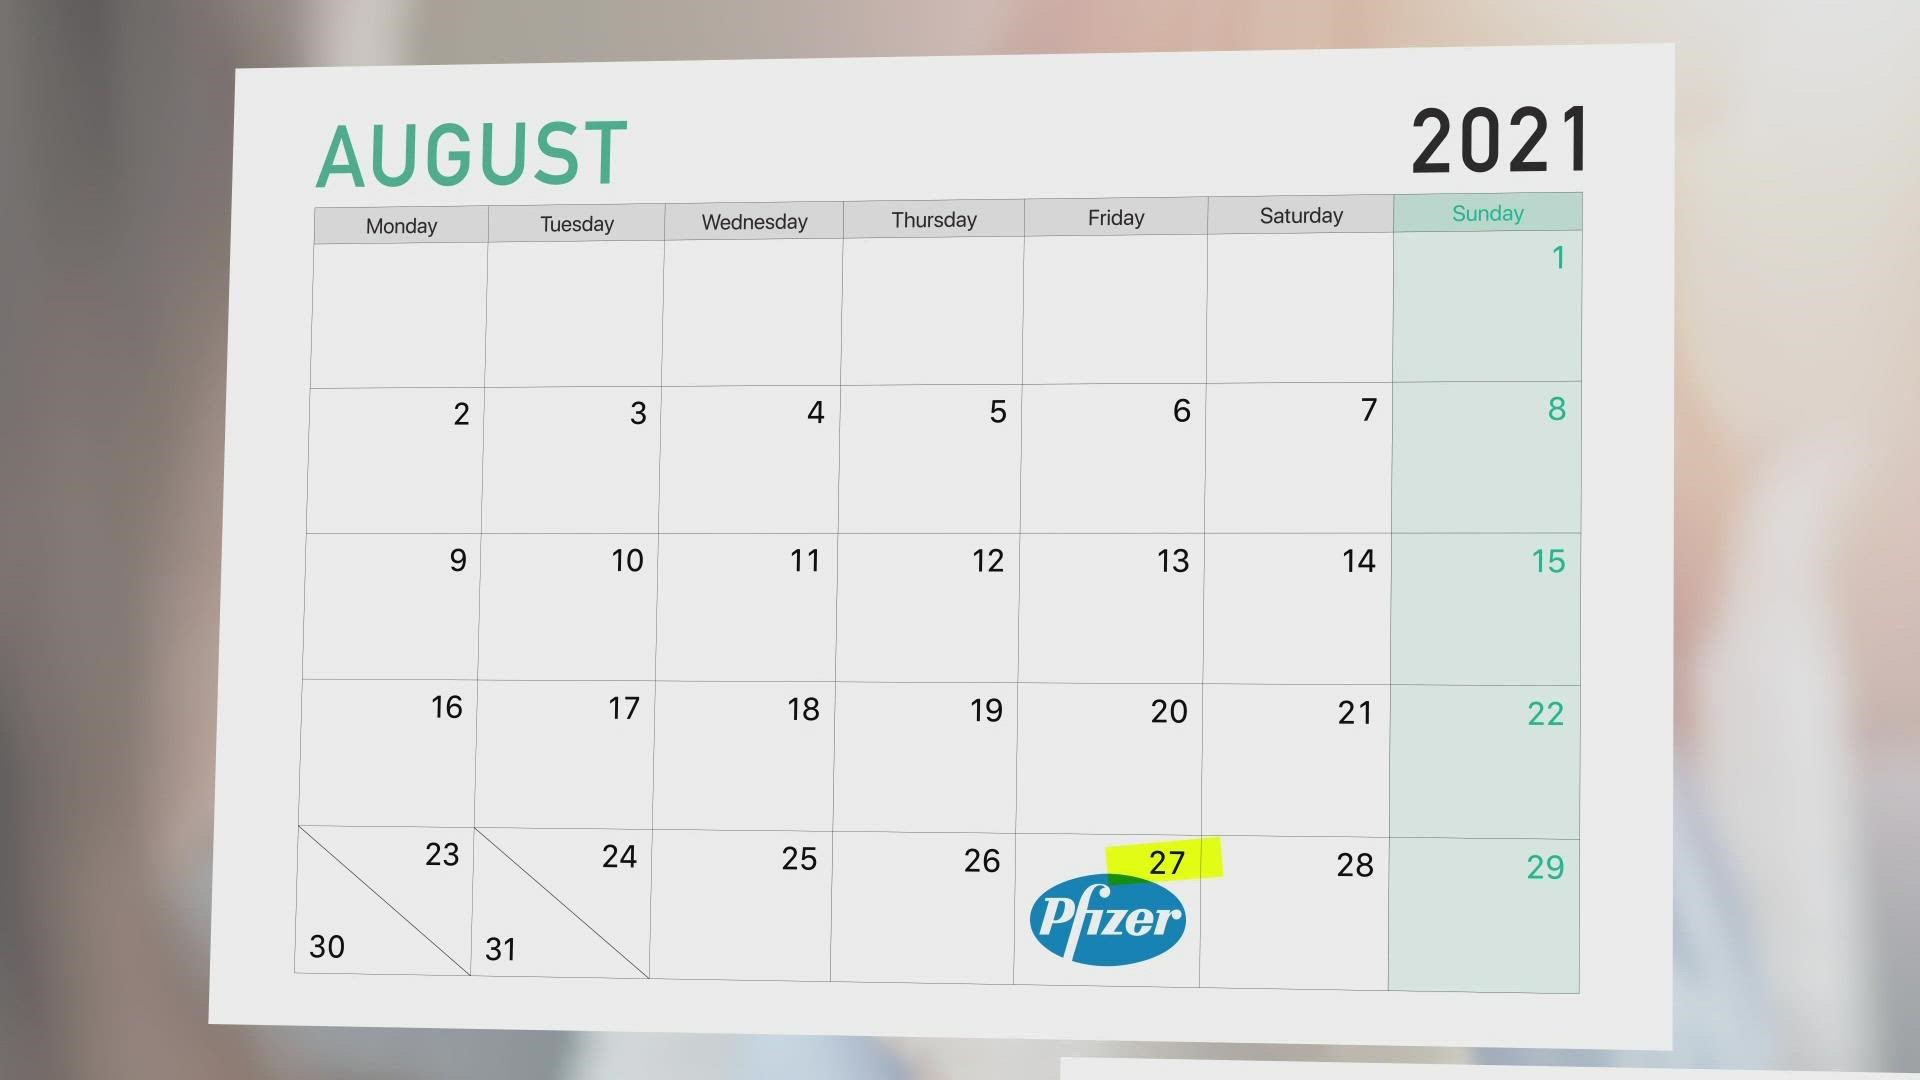 This Friday, August 27, is the last day workers can received a first dose of the Pfizer vaccine and be fully vaccinated by October 1st.